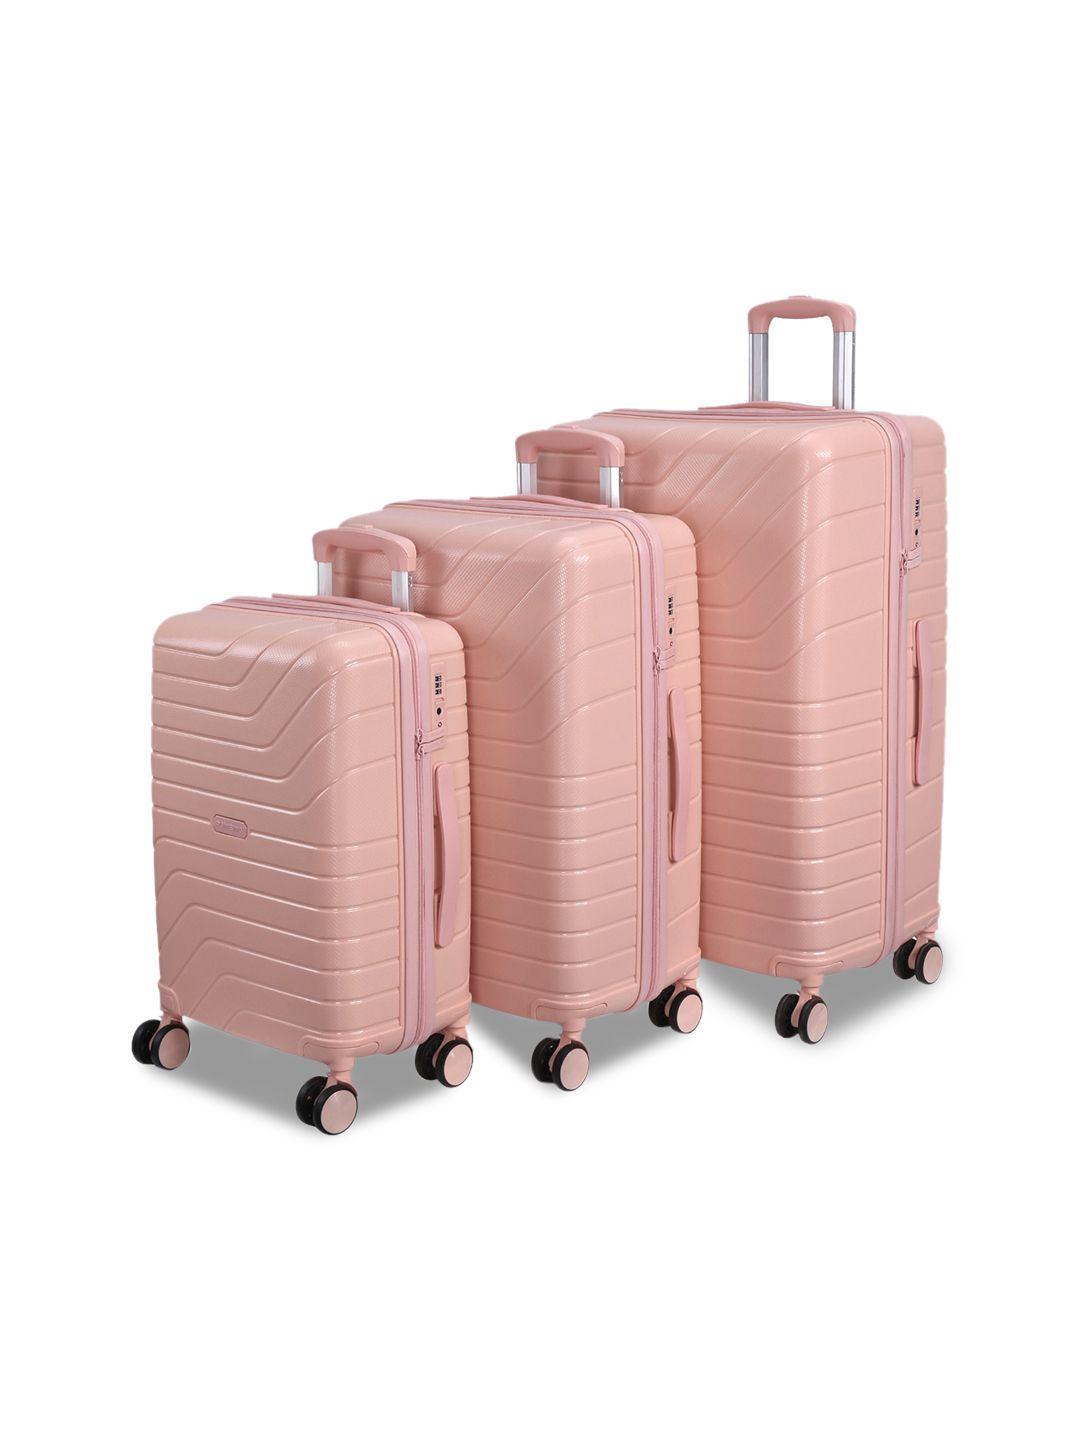 romeing tuscany set of 3 textured hard polypropylene trolley suitcases